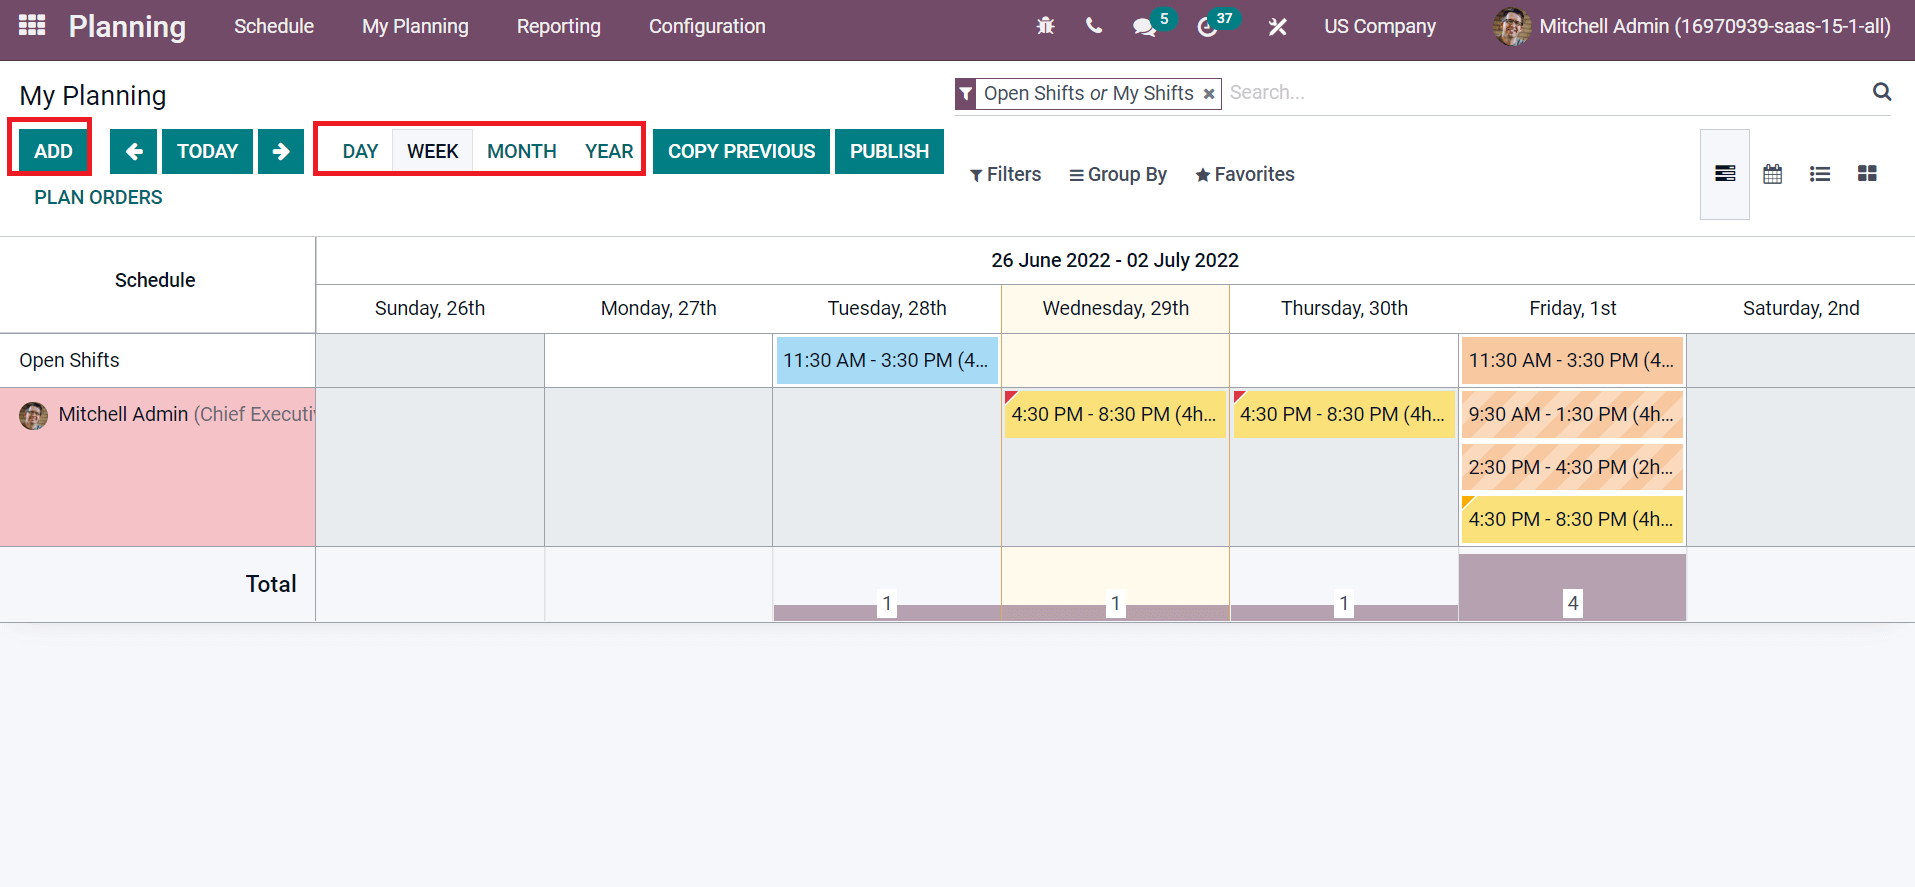 employee-shift-management-with-the-help-of-odoo-15-planning-module-cybrosys